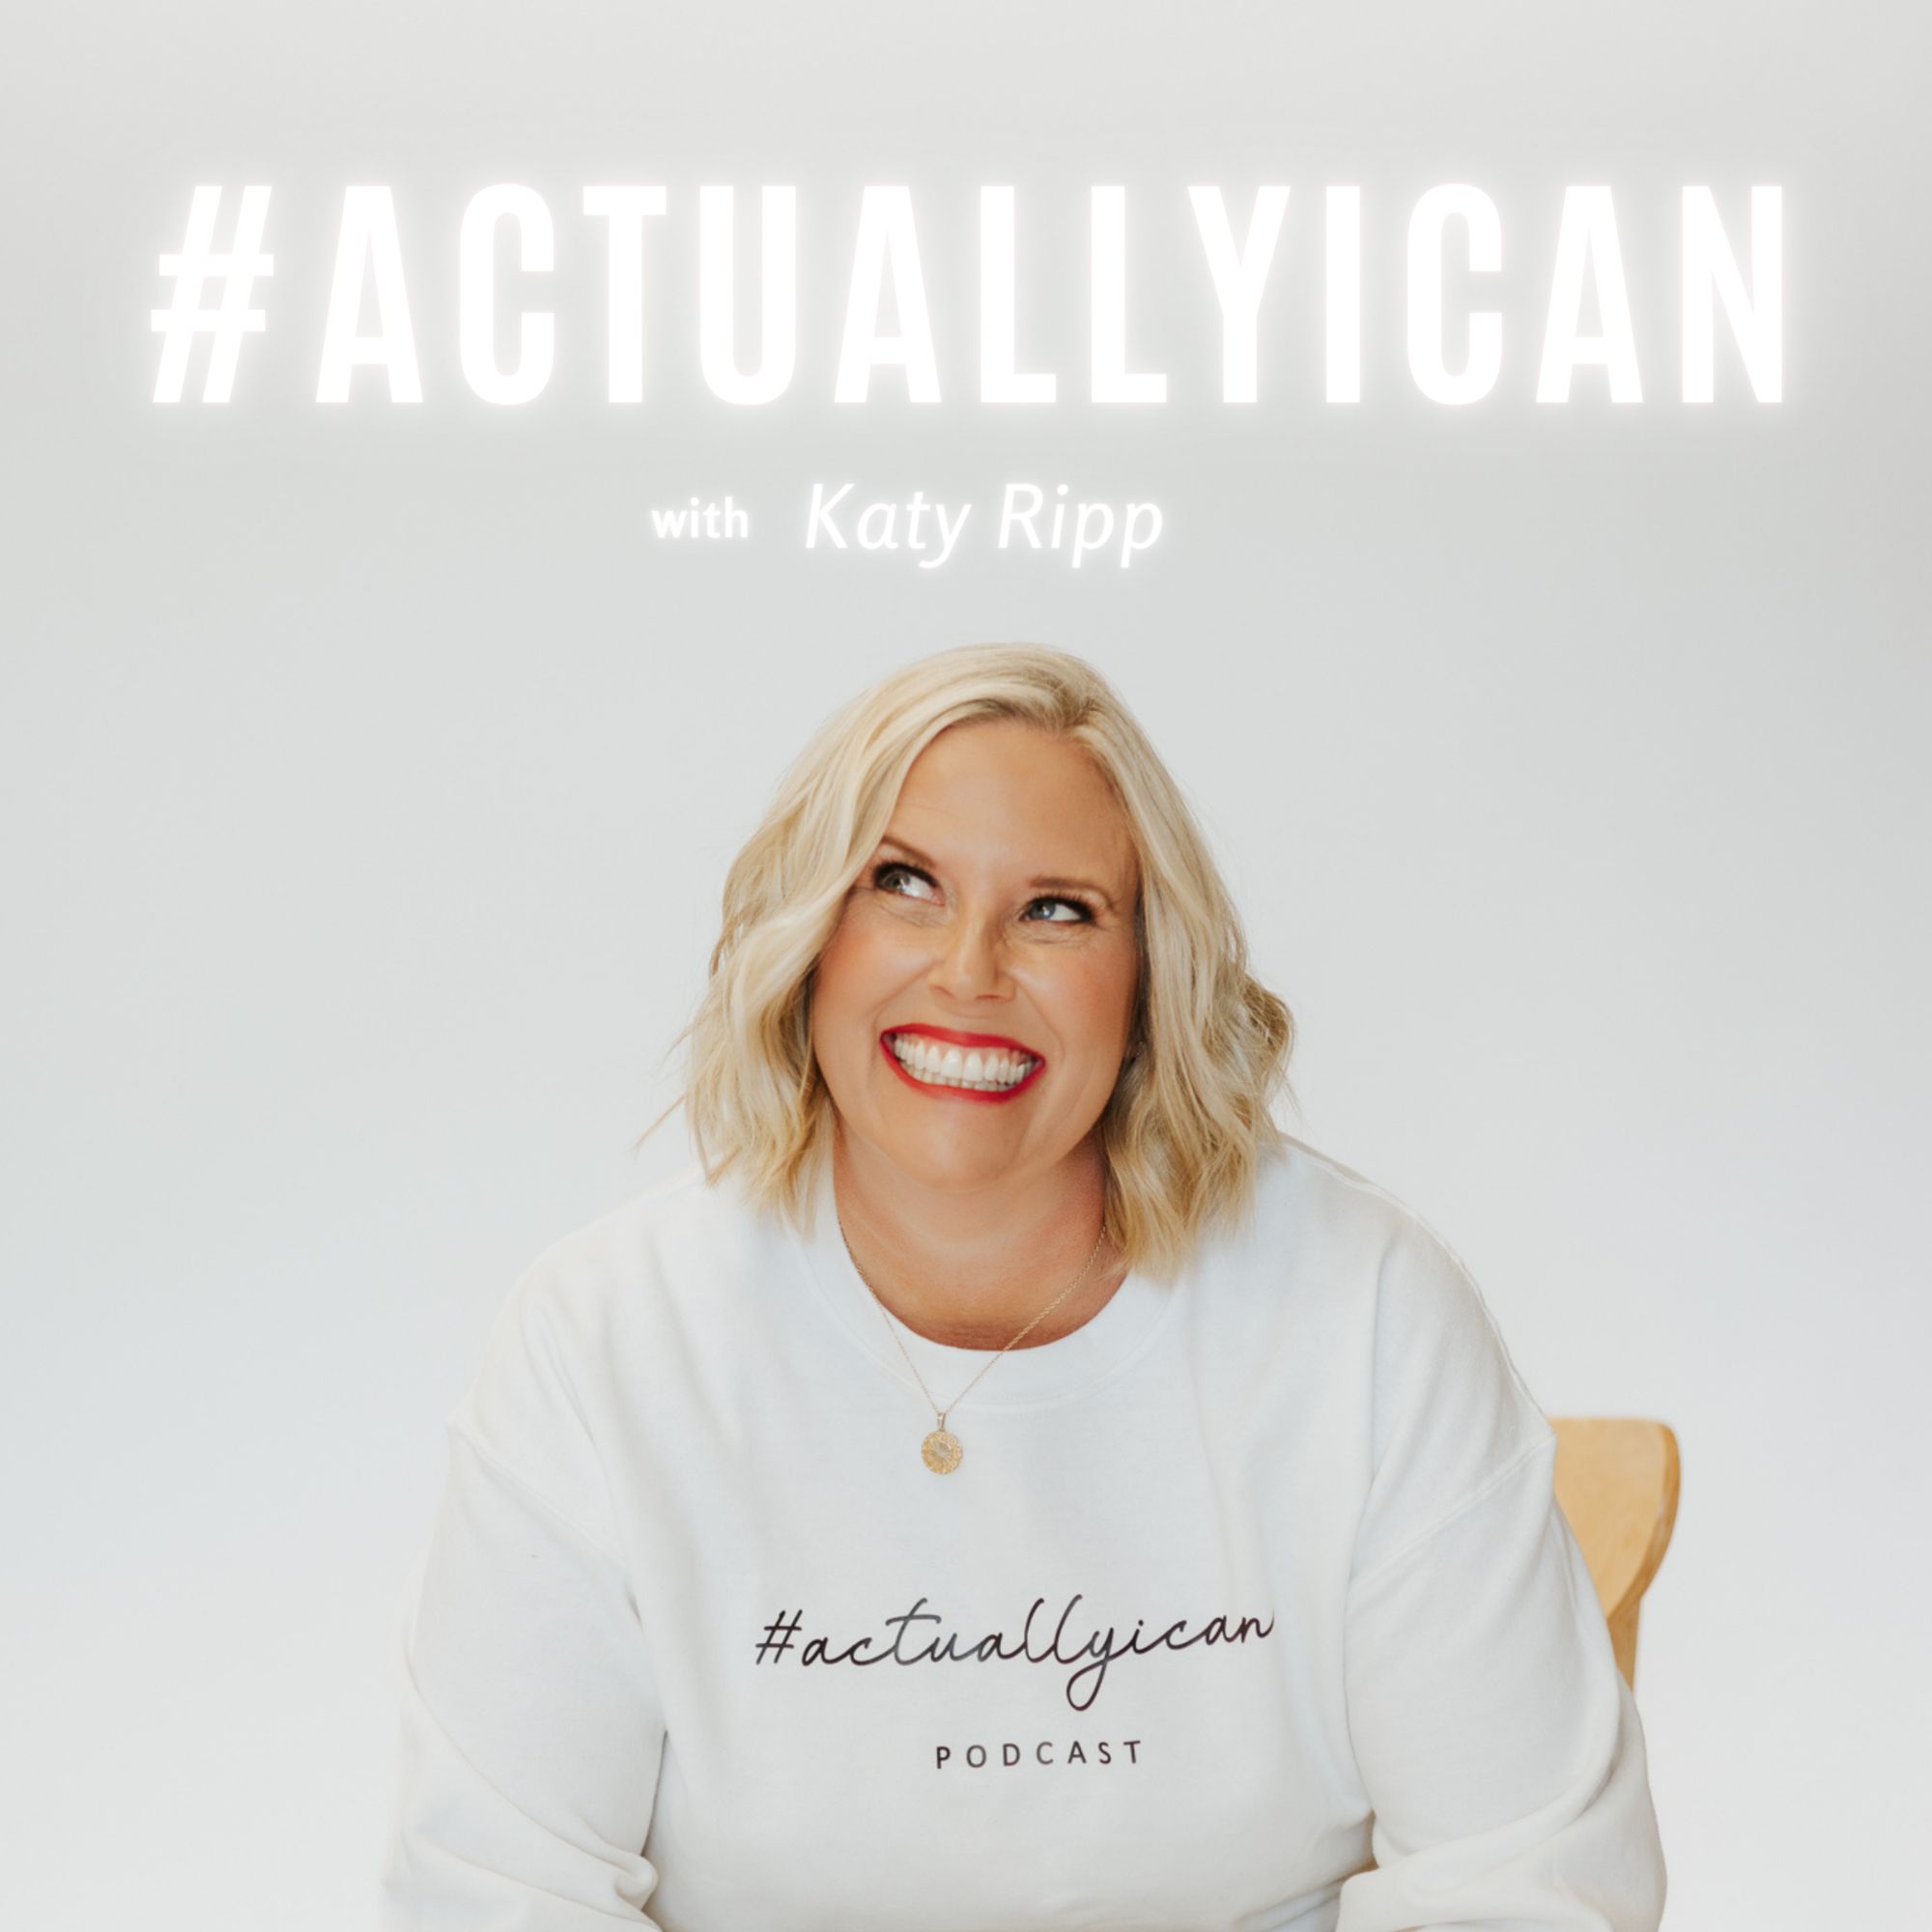 Katy Ripp, podcast, Hashtag Actually I Can, personal journey, taboo topics, death, money, weight loss, sobriety, excessive drinking, overeating, debt, grief, coaching certification, inspiring stories, despair, near-death experiences, financial struggles, live coaching calls, Dear Katie segments, serial entrepreneur, small businesses, manifestation, law of attraction, empowering women, social media, #ActuallyICanPodcast, laughter, confidence